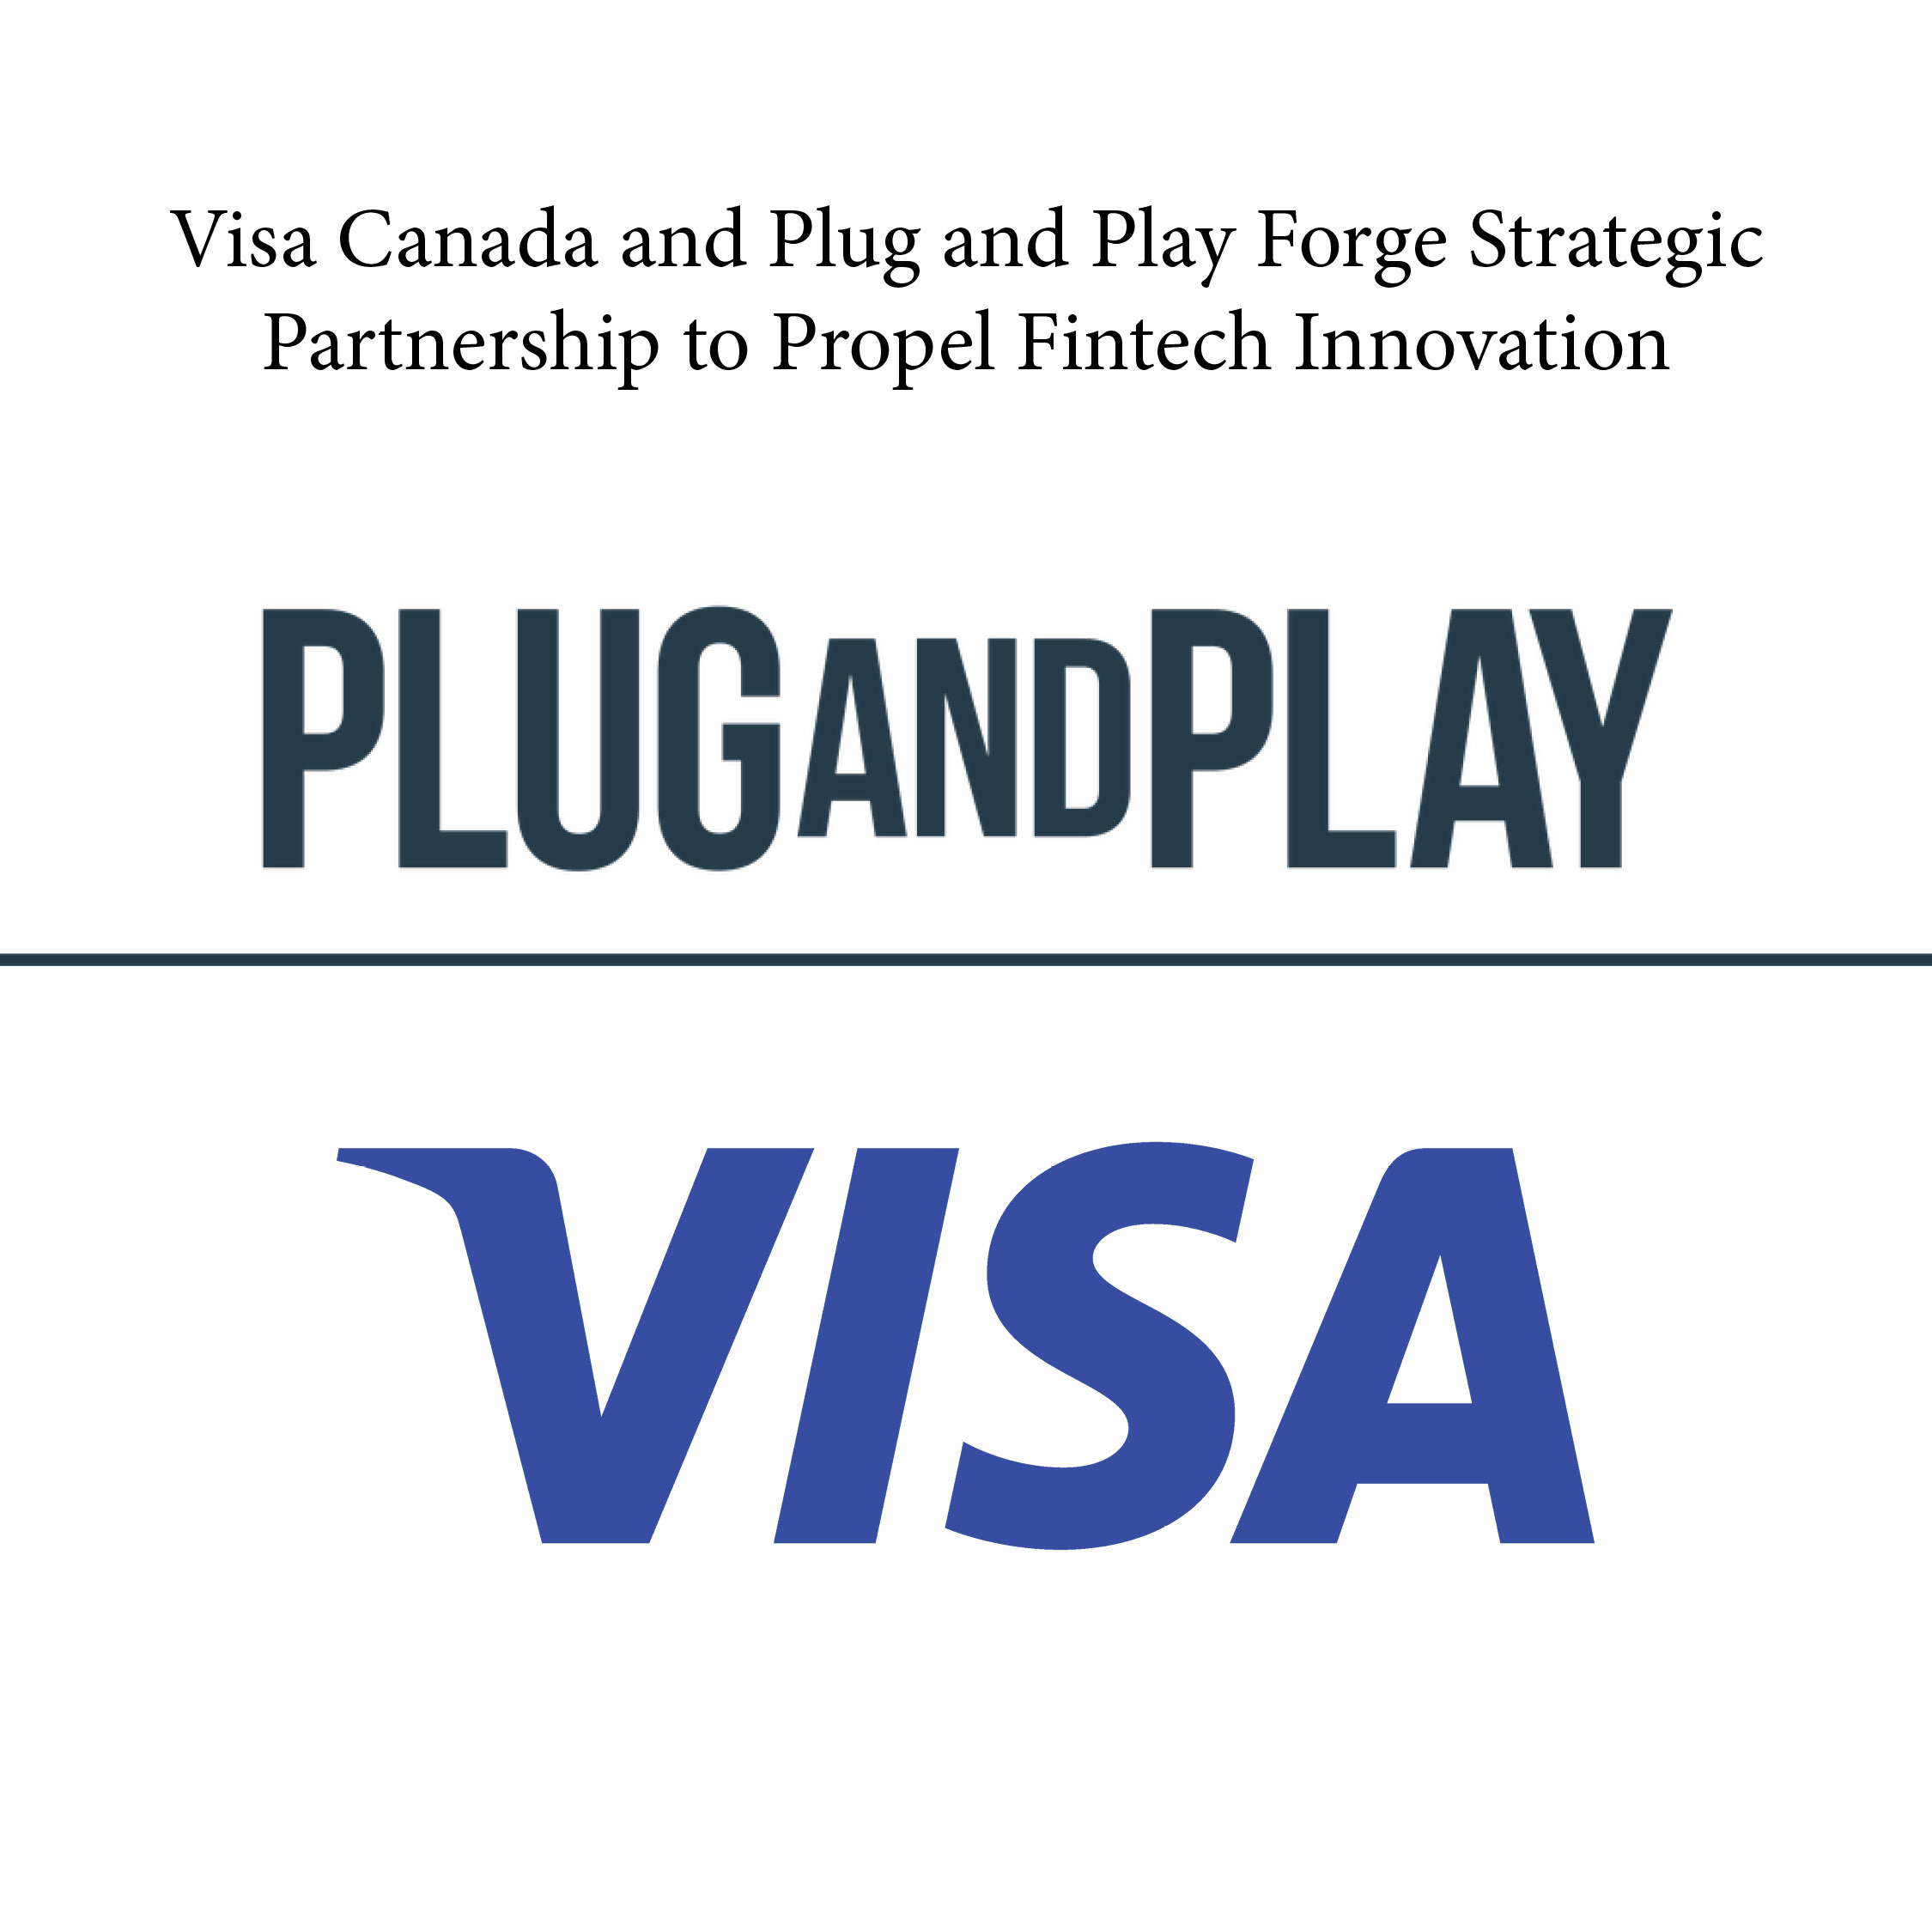 Visa Canada and Plug and Play Forge Strategic Partnership to Propel Fintech Innovation